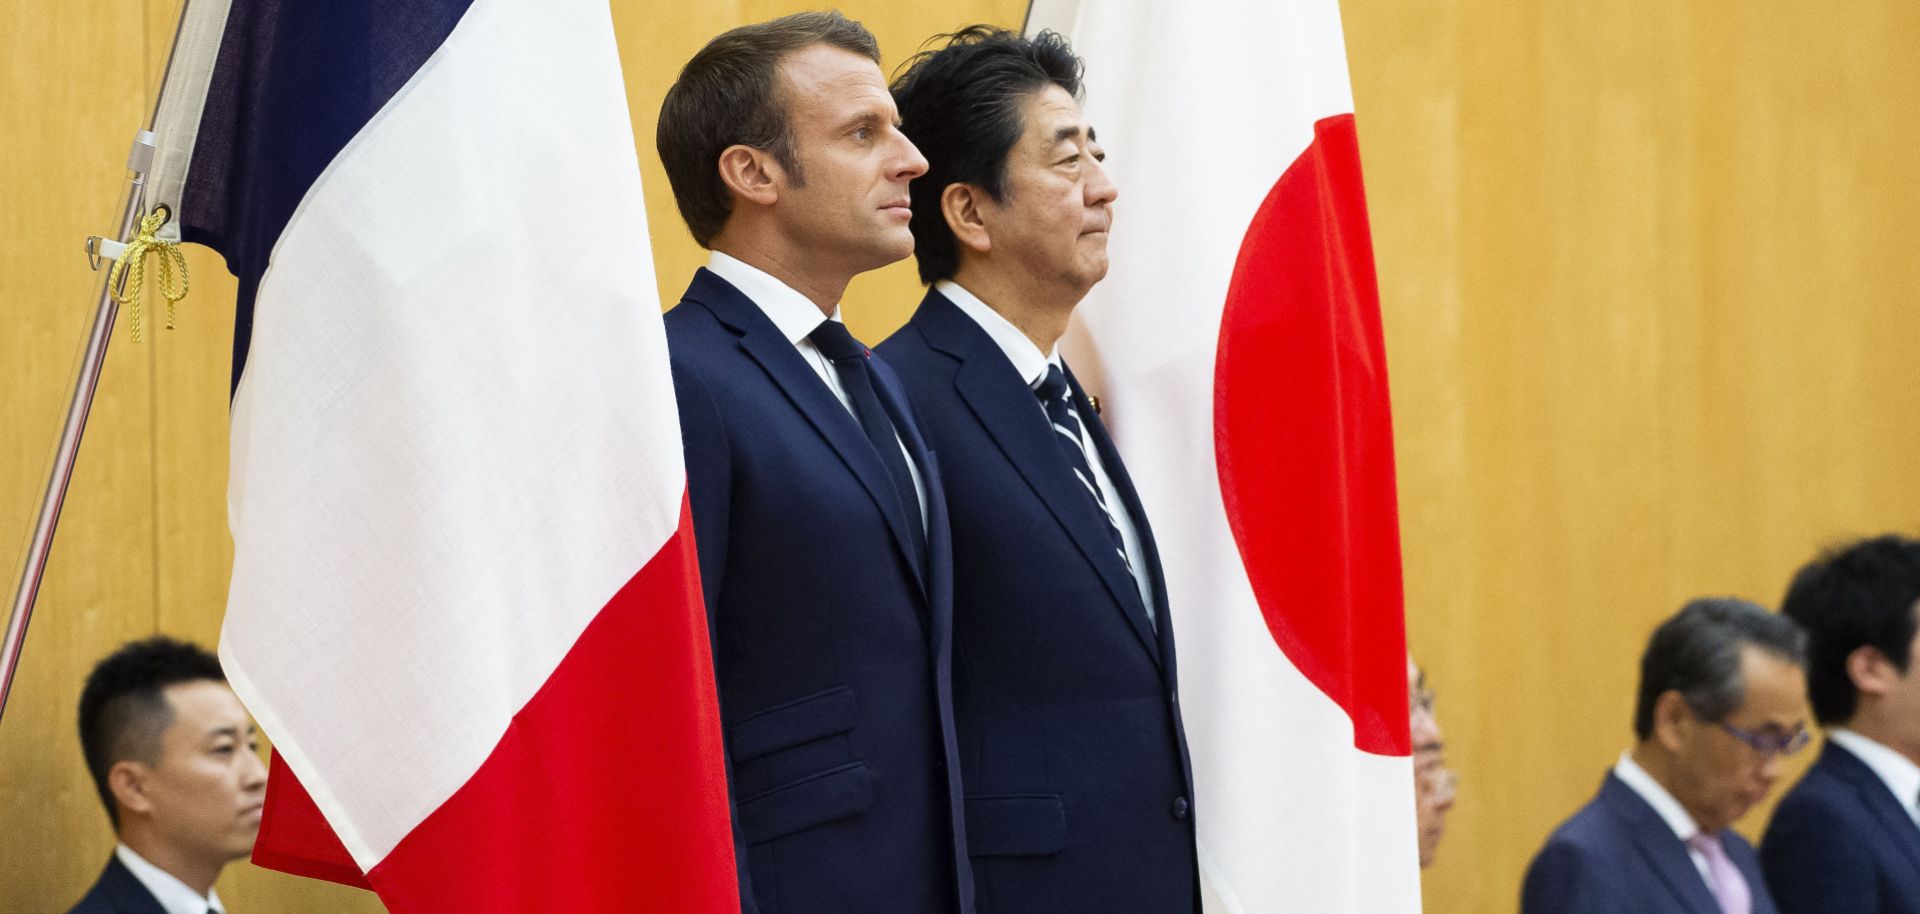 Japanese Prime Minister Shinzo Abe and French President Emmanuel Macron attend an official ceremony in Tokyo on June 26, 2019.